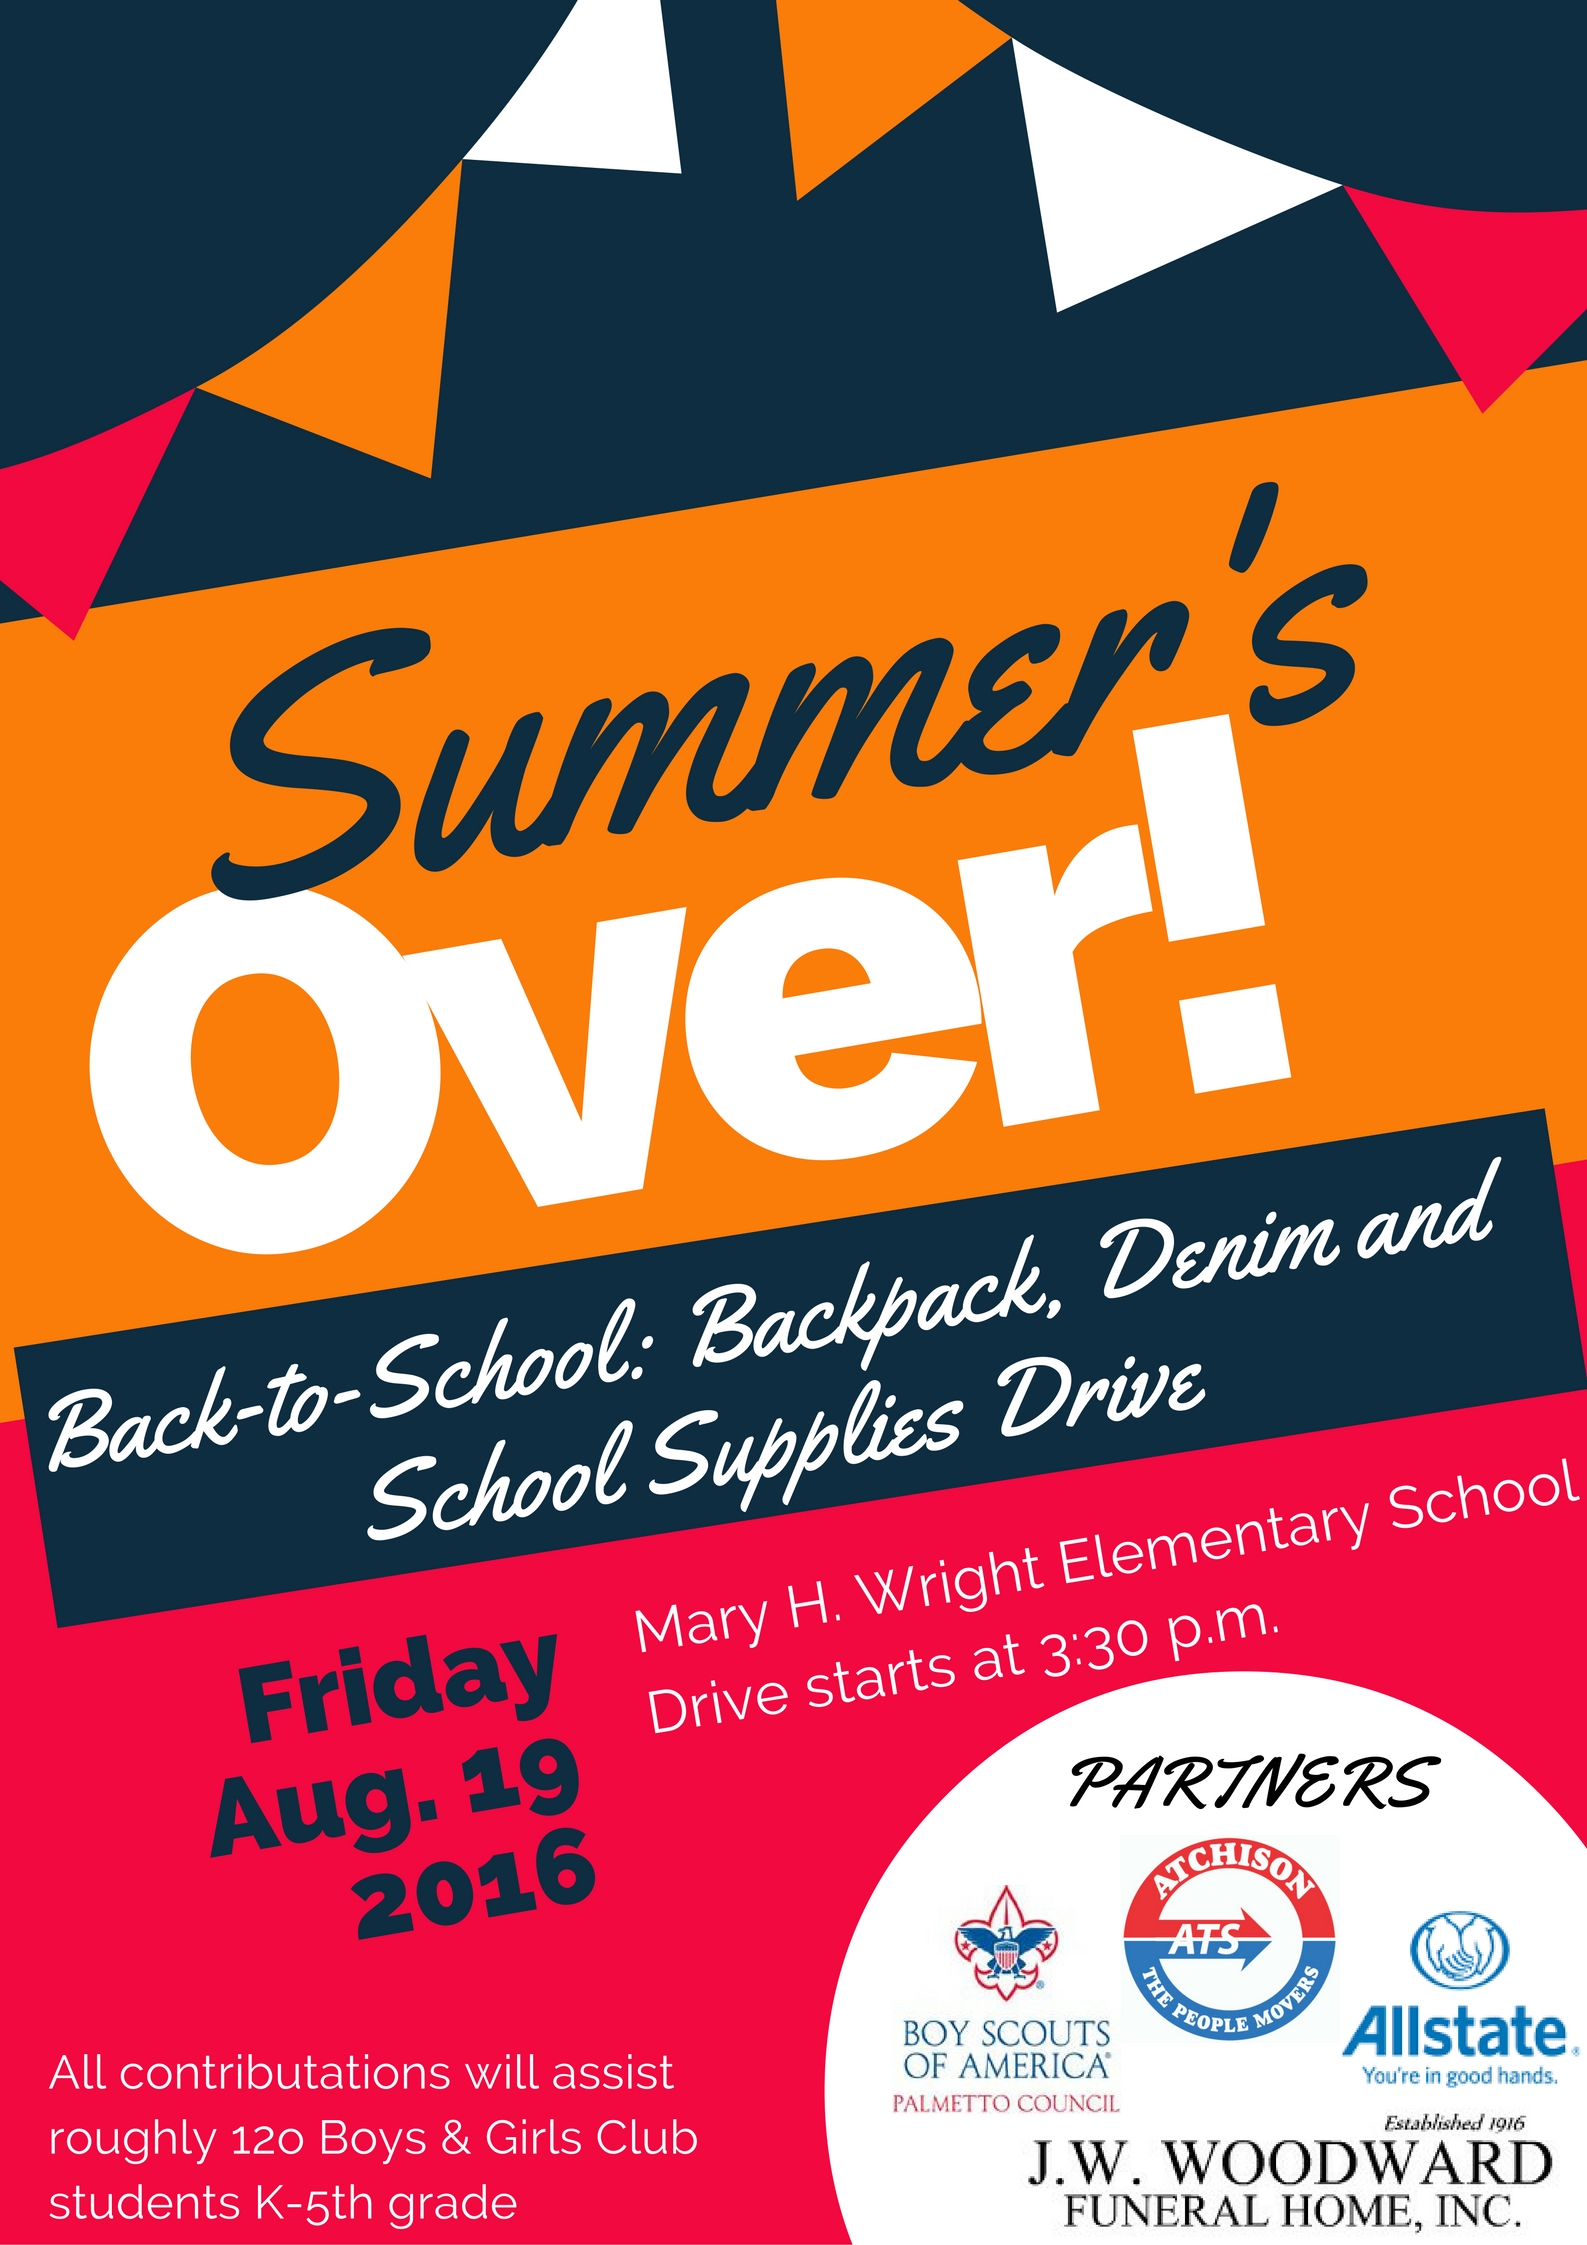 Back-to-School: Backpack, Denim and School Supplies Drive